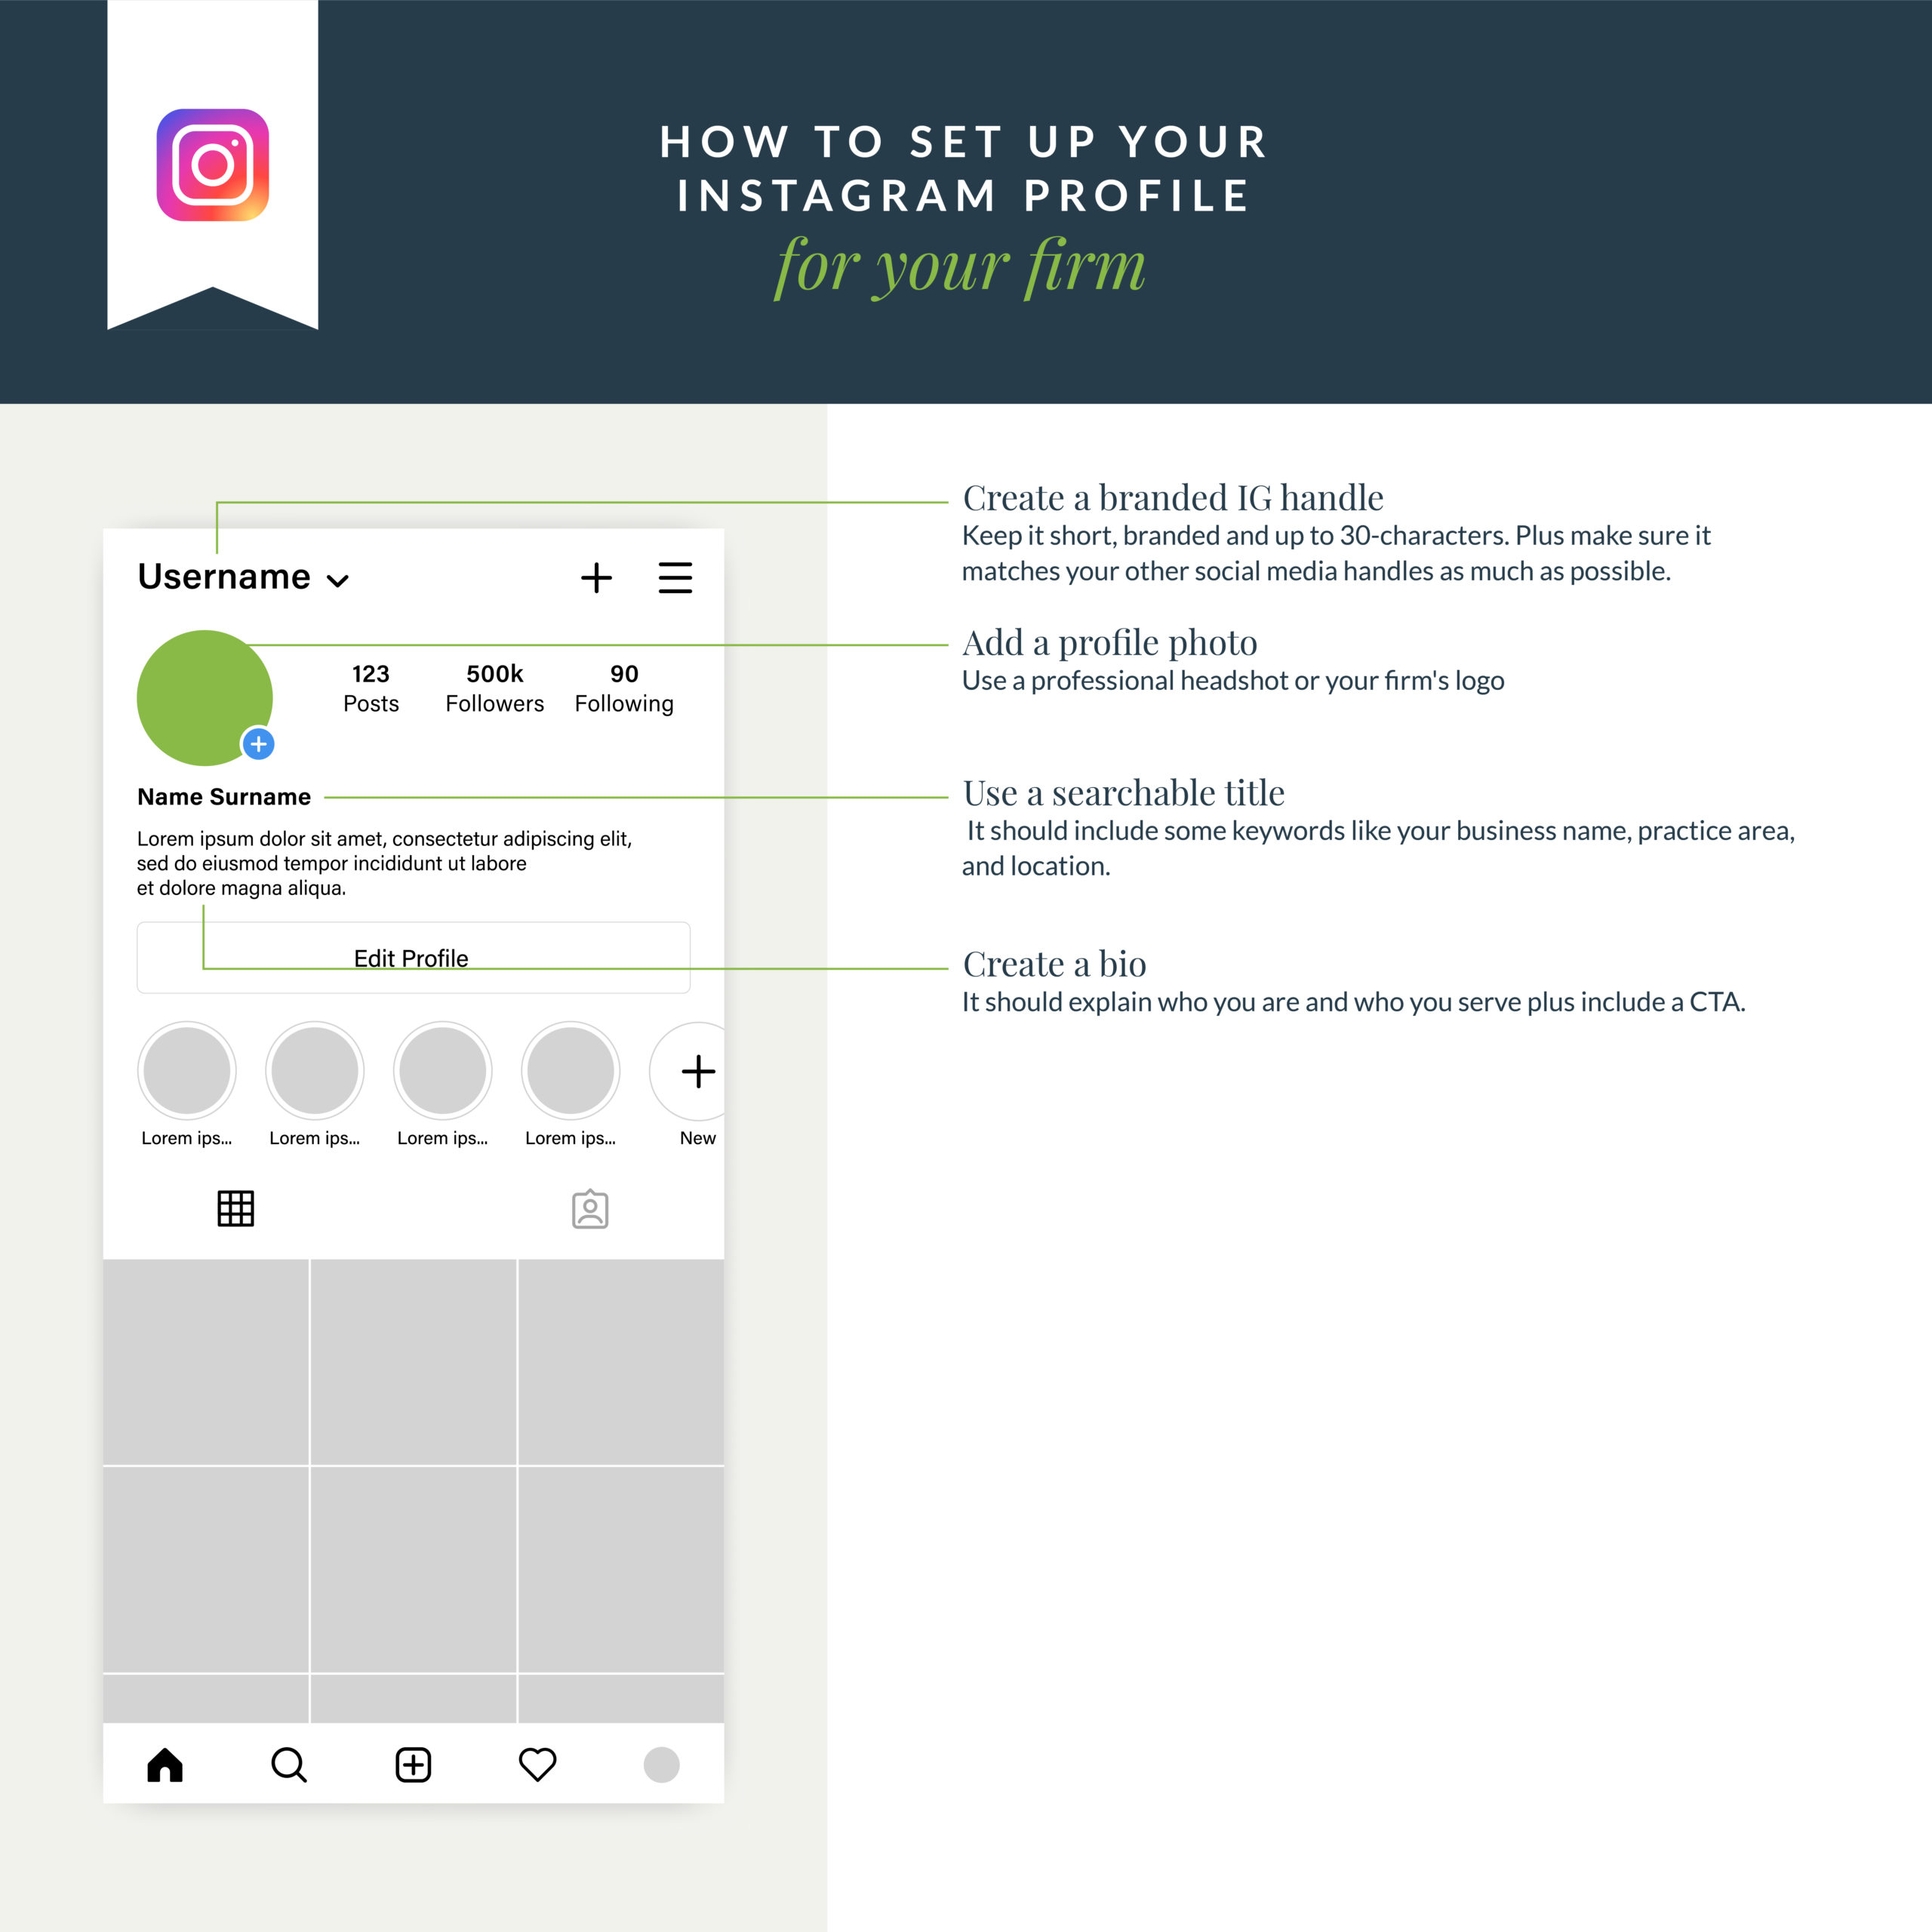 Anatomy of an instagram profile